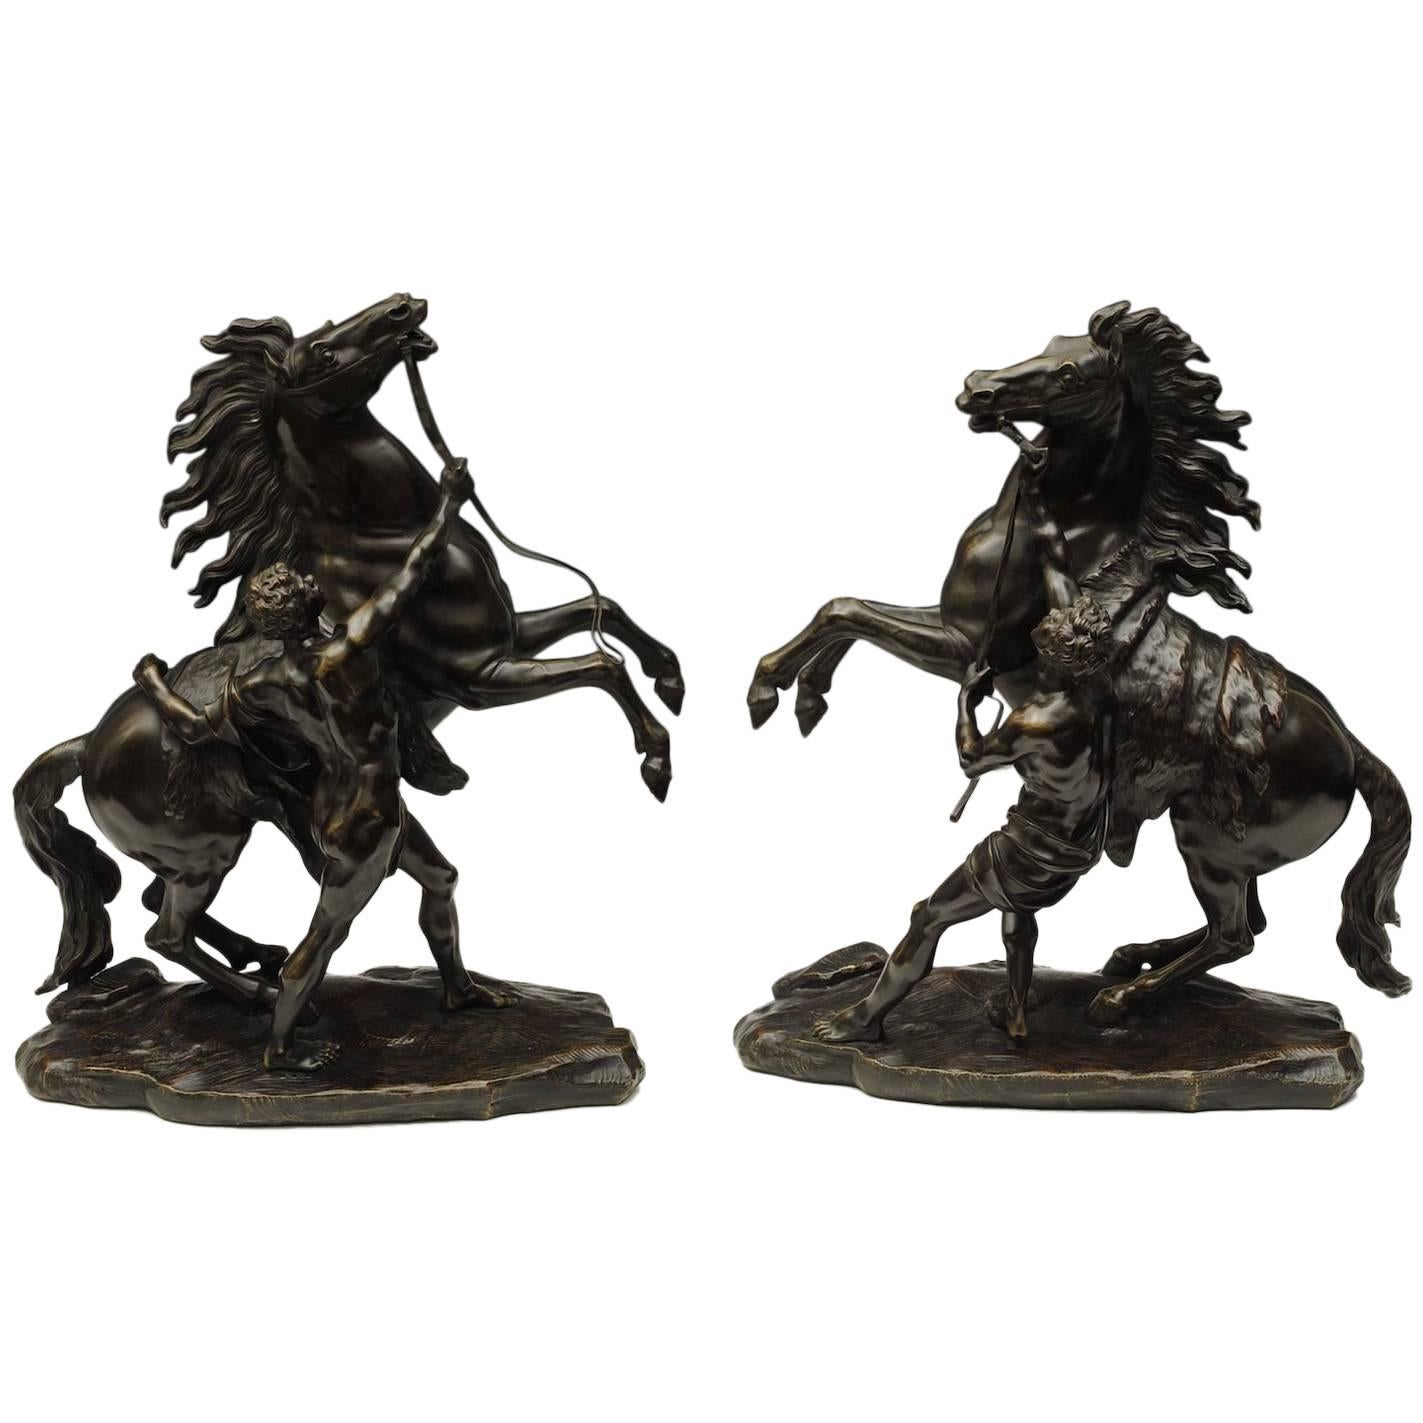 Fine Pair of 19th Century Bronzes of The Marley Horses